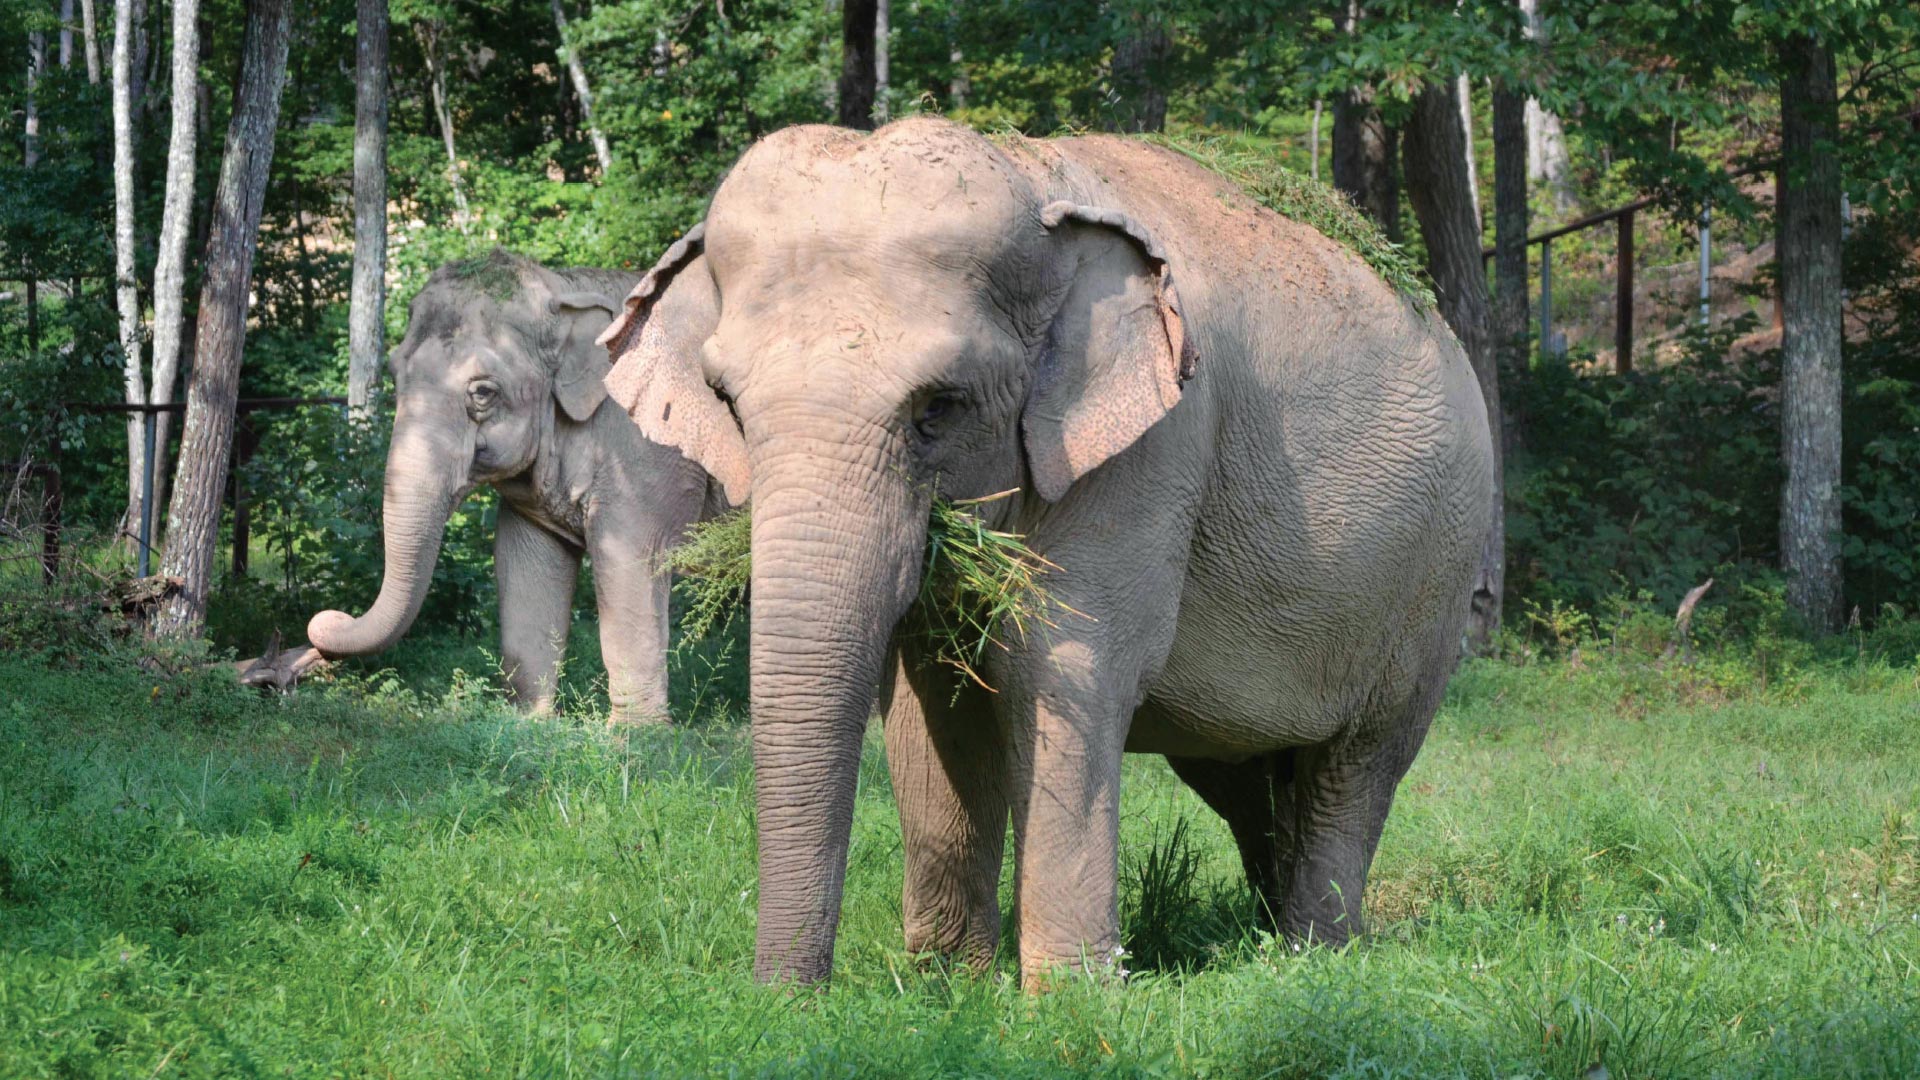 The Elephants of Middle Tennessee